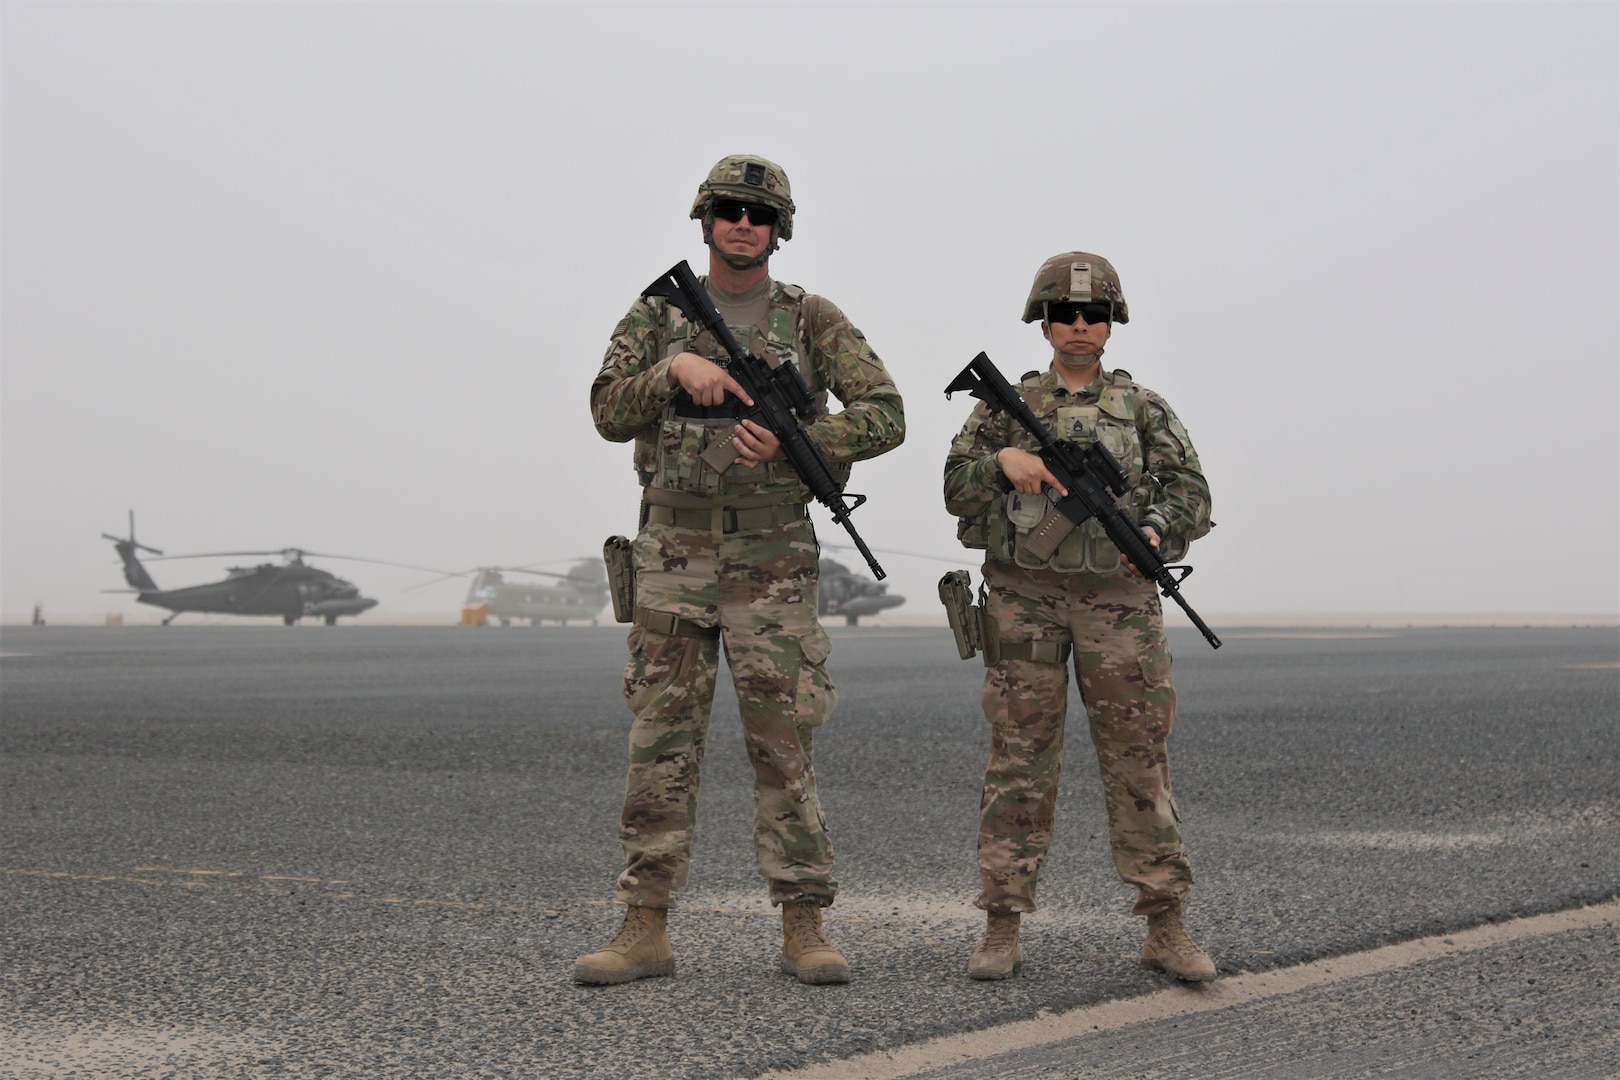 Sgt. Daniel Gunther and Staff Sgt. Cindy Gray at Camp Buehring, Kuwait. Gunther and Gray are California Army National Guard members deployed to the Middle East with Task Force Phoenix. On the civilian side, both are highway patrol officers with the California Highway Patrol (CHP).